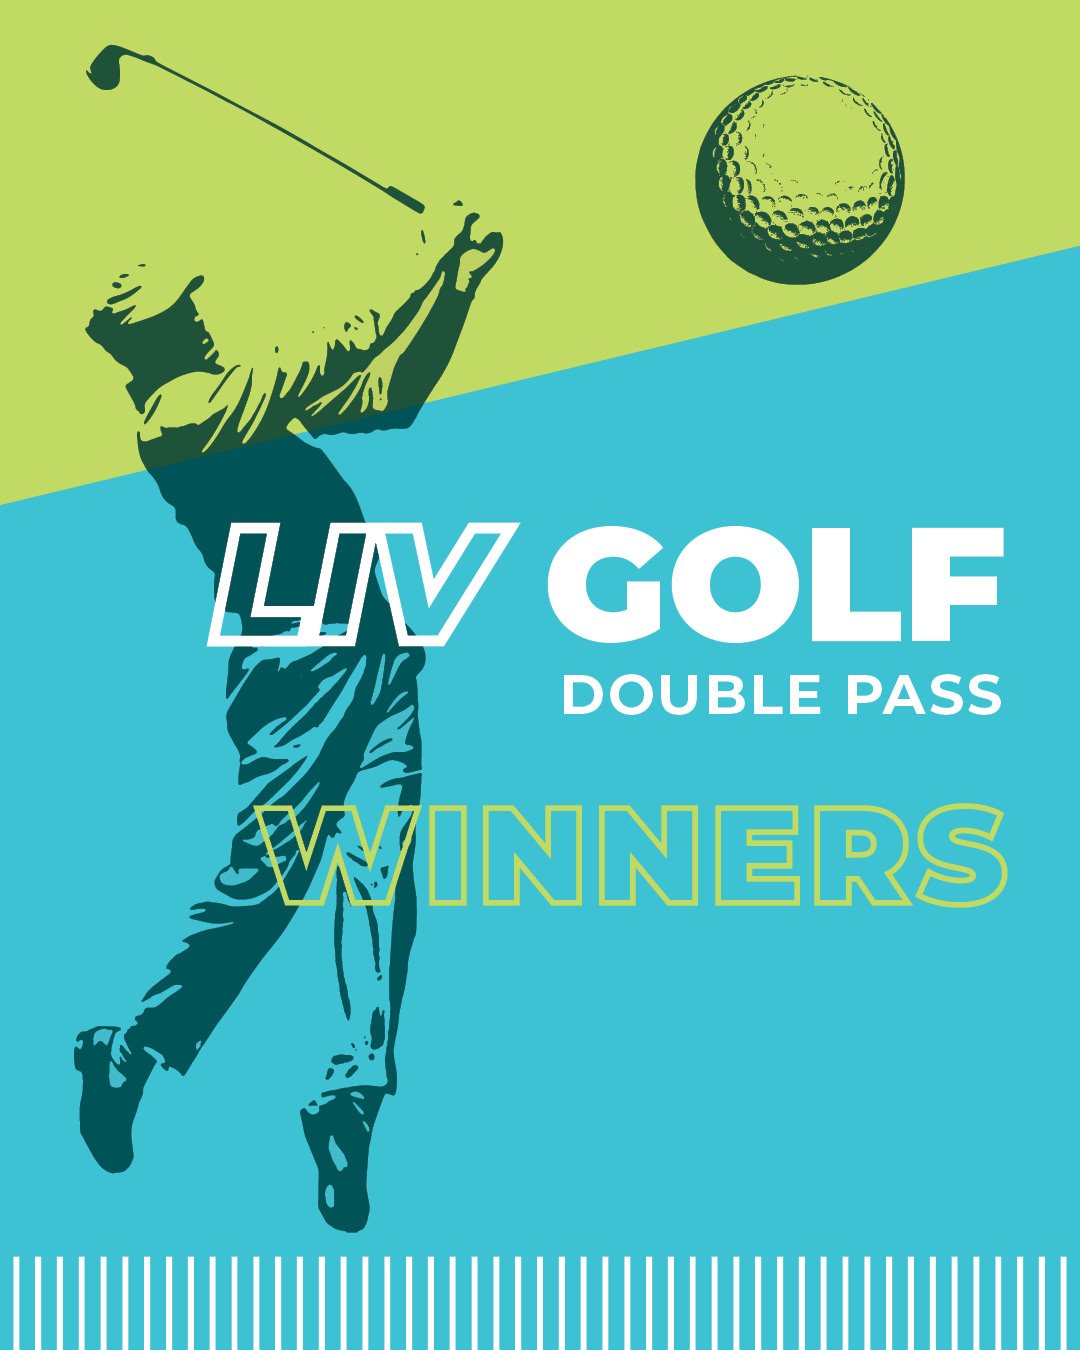 Congratulations to the winners of our LIV Golf double pass giveaway!

Friday tickets - Julie Cornall
Saturday tickets - Jordan Cracky
Sunday tickets - Bek Bova

On behalf of the whole Bartley team, we wish our lucky winners an amazing day at LIV Golf